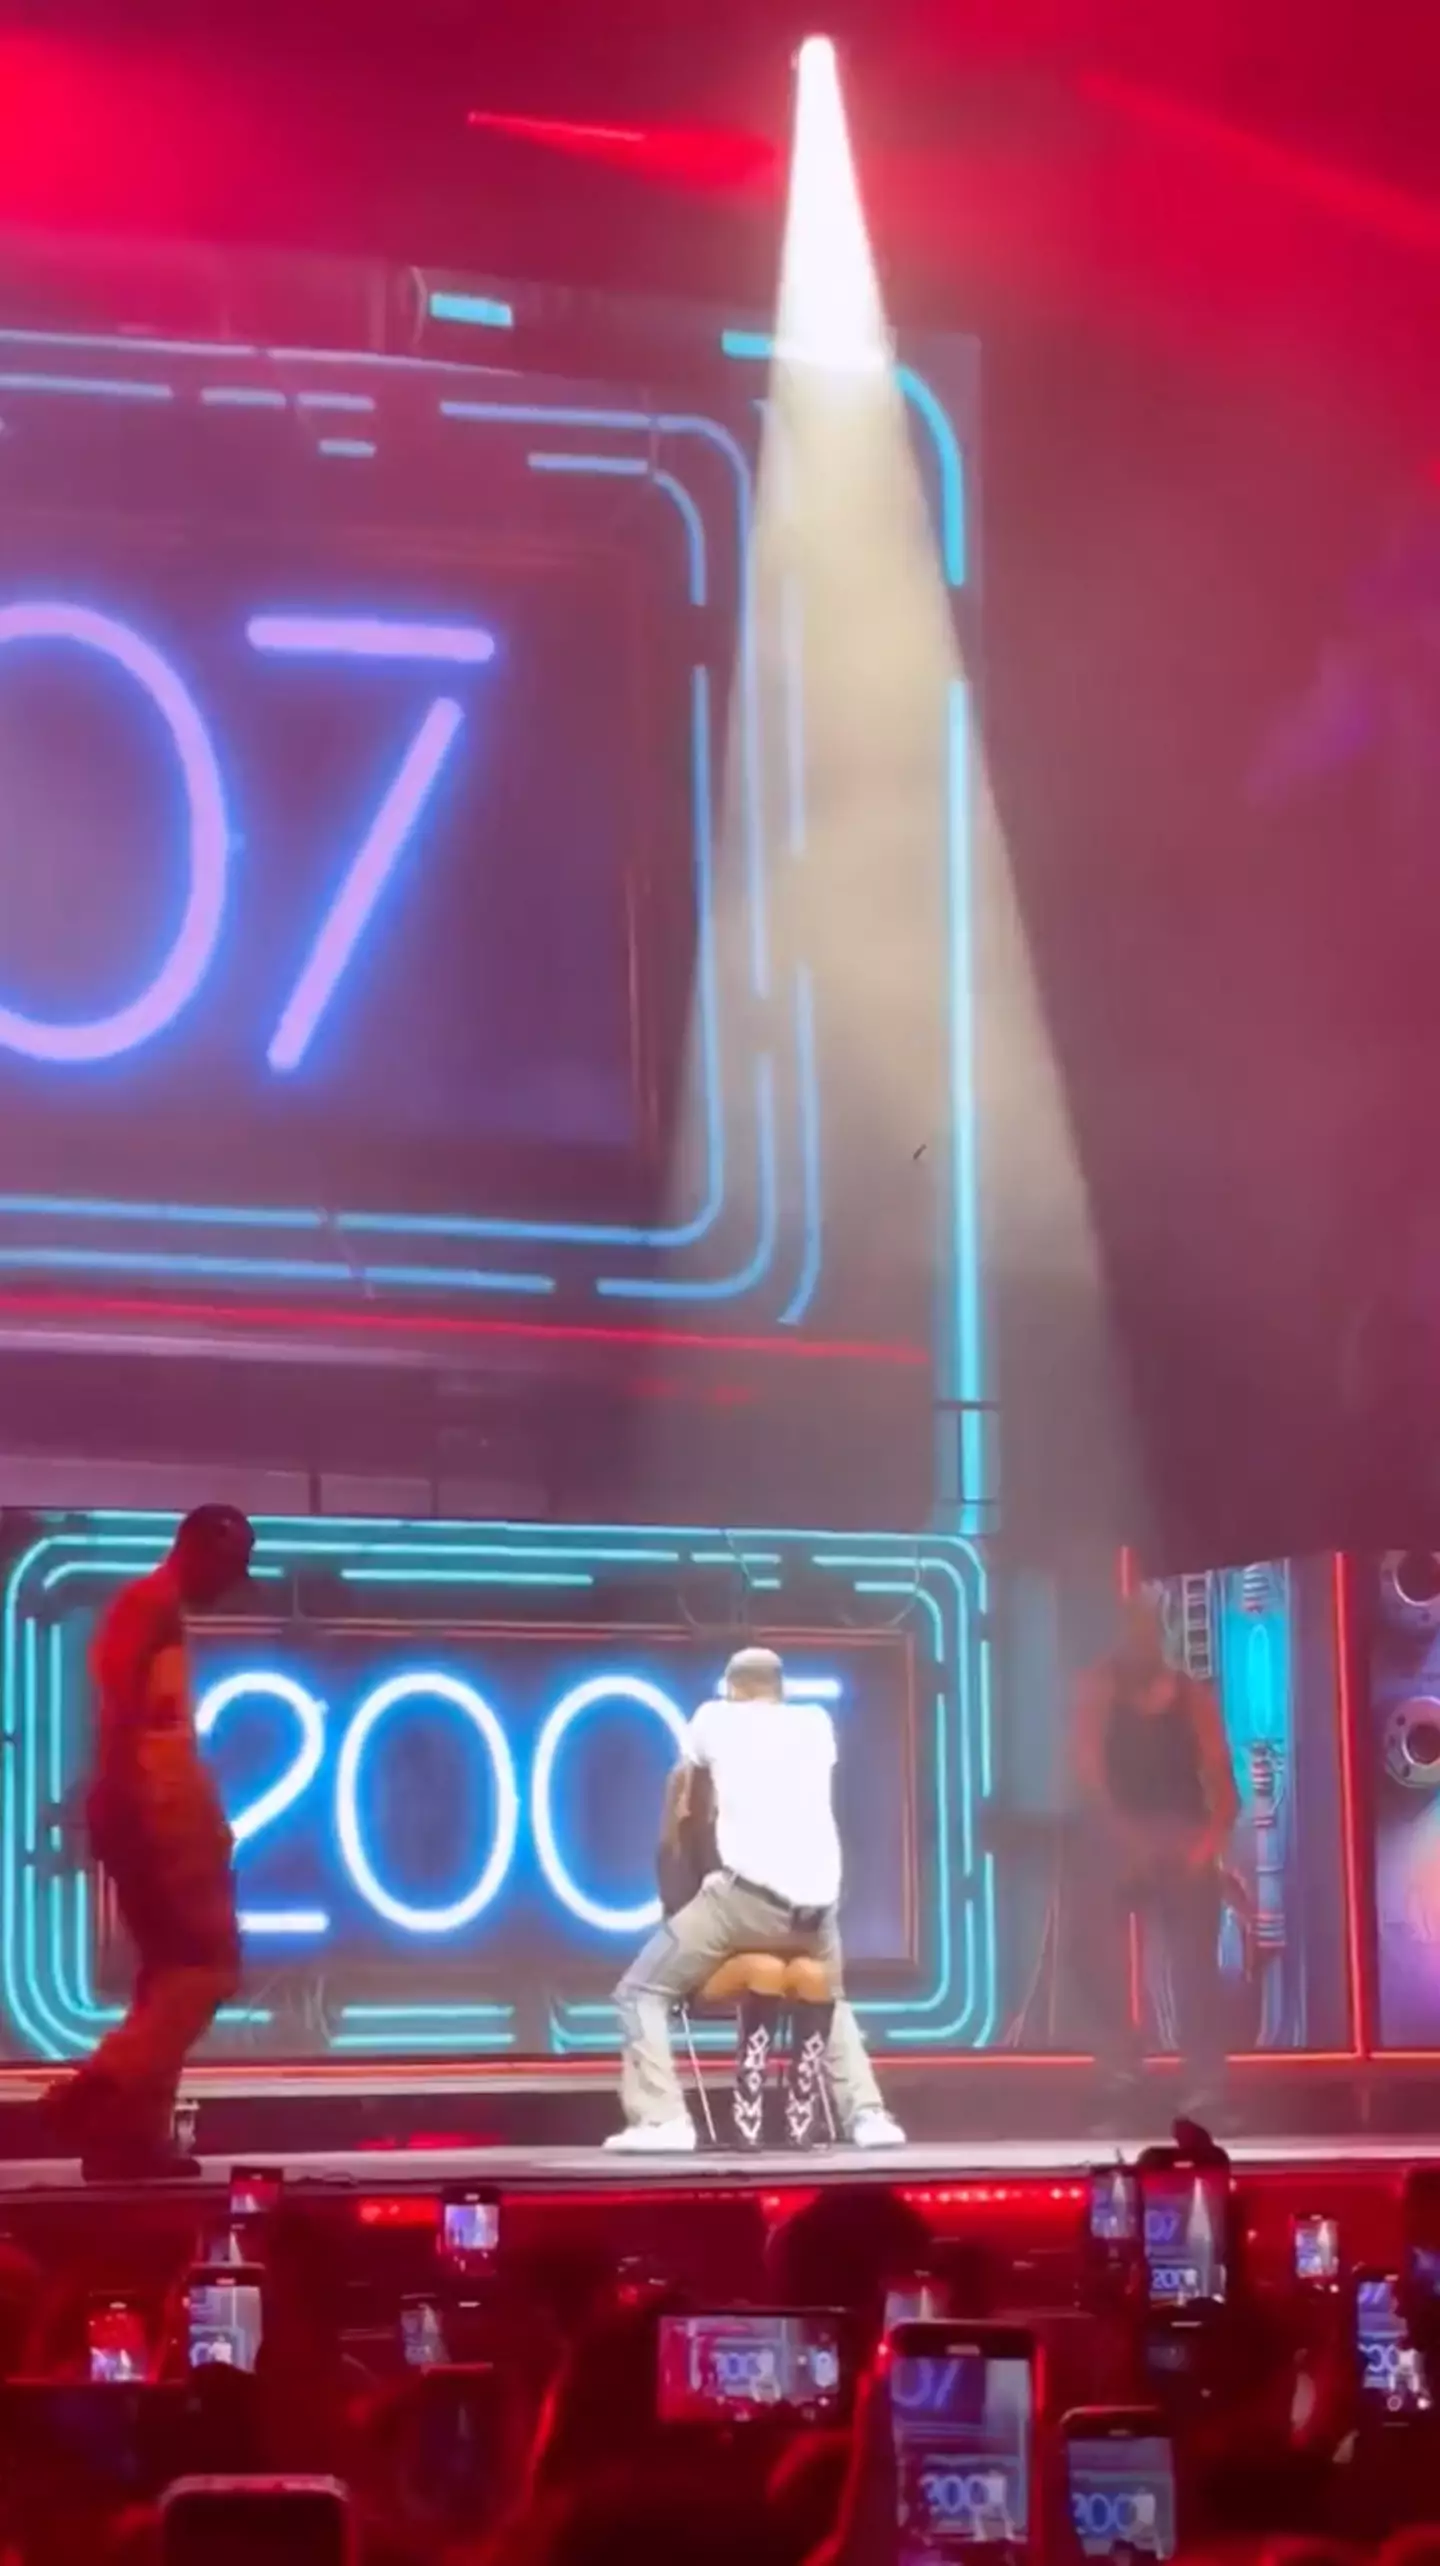 Chris Brown performs a lap dance during this part of the show.